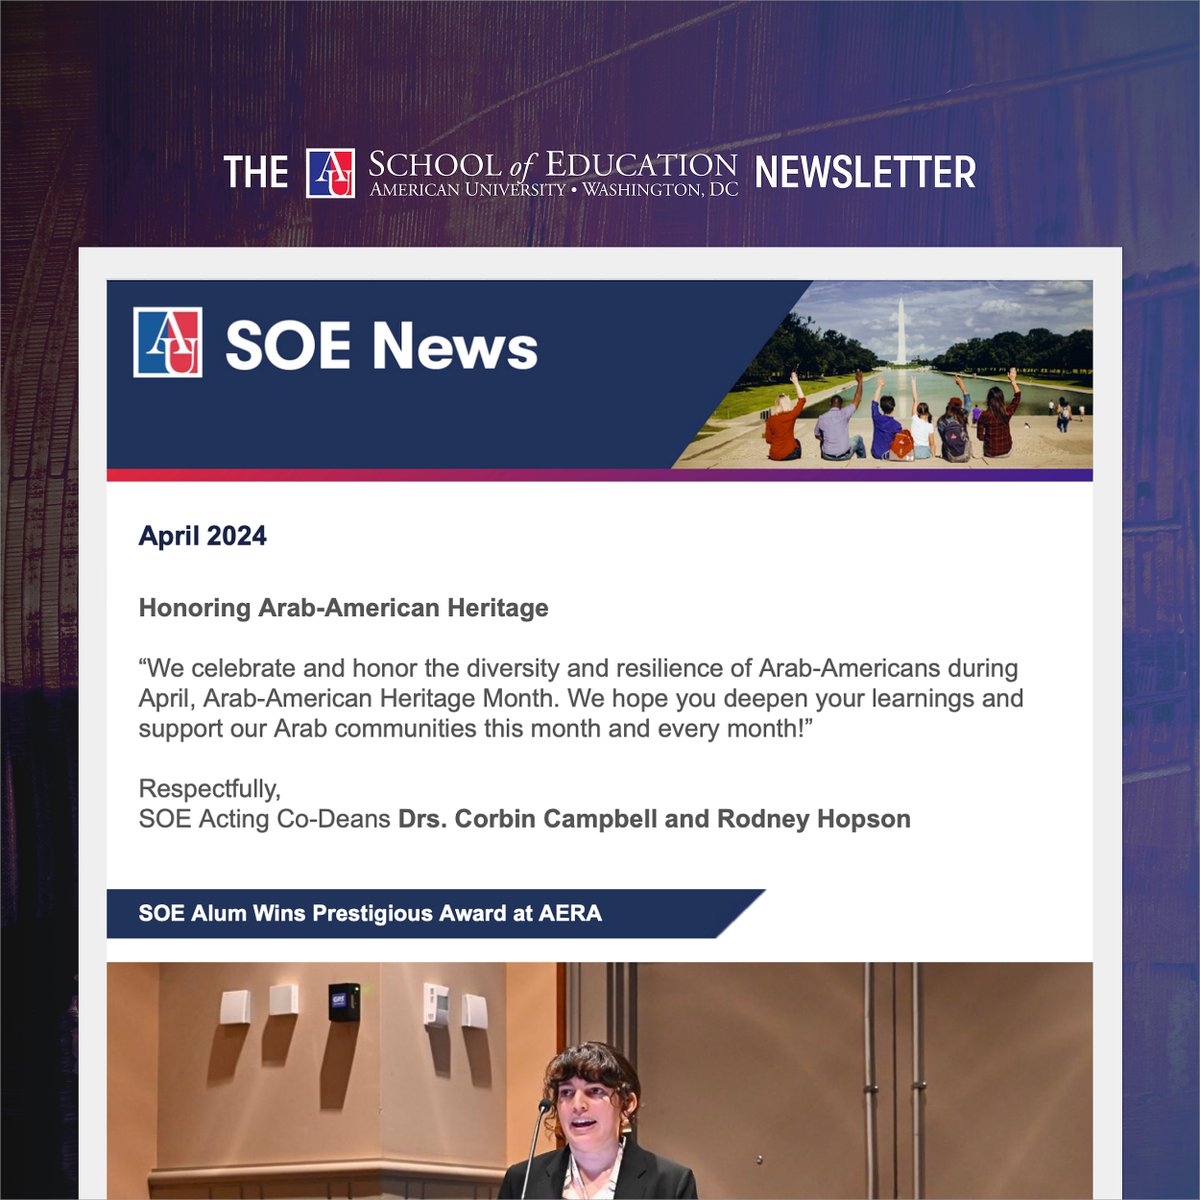 Read about how the cutting-edge #research of SOE's faculty, students, and staff was highlighted at @AERA_EdResearch's phenomenal Annual Meeting and more exciting happenings in our latest newsletter at bit.ly/soeAPR2024news. @AmericanU #education #news #events #community